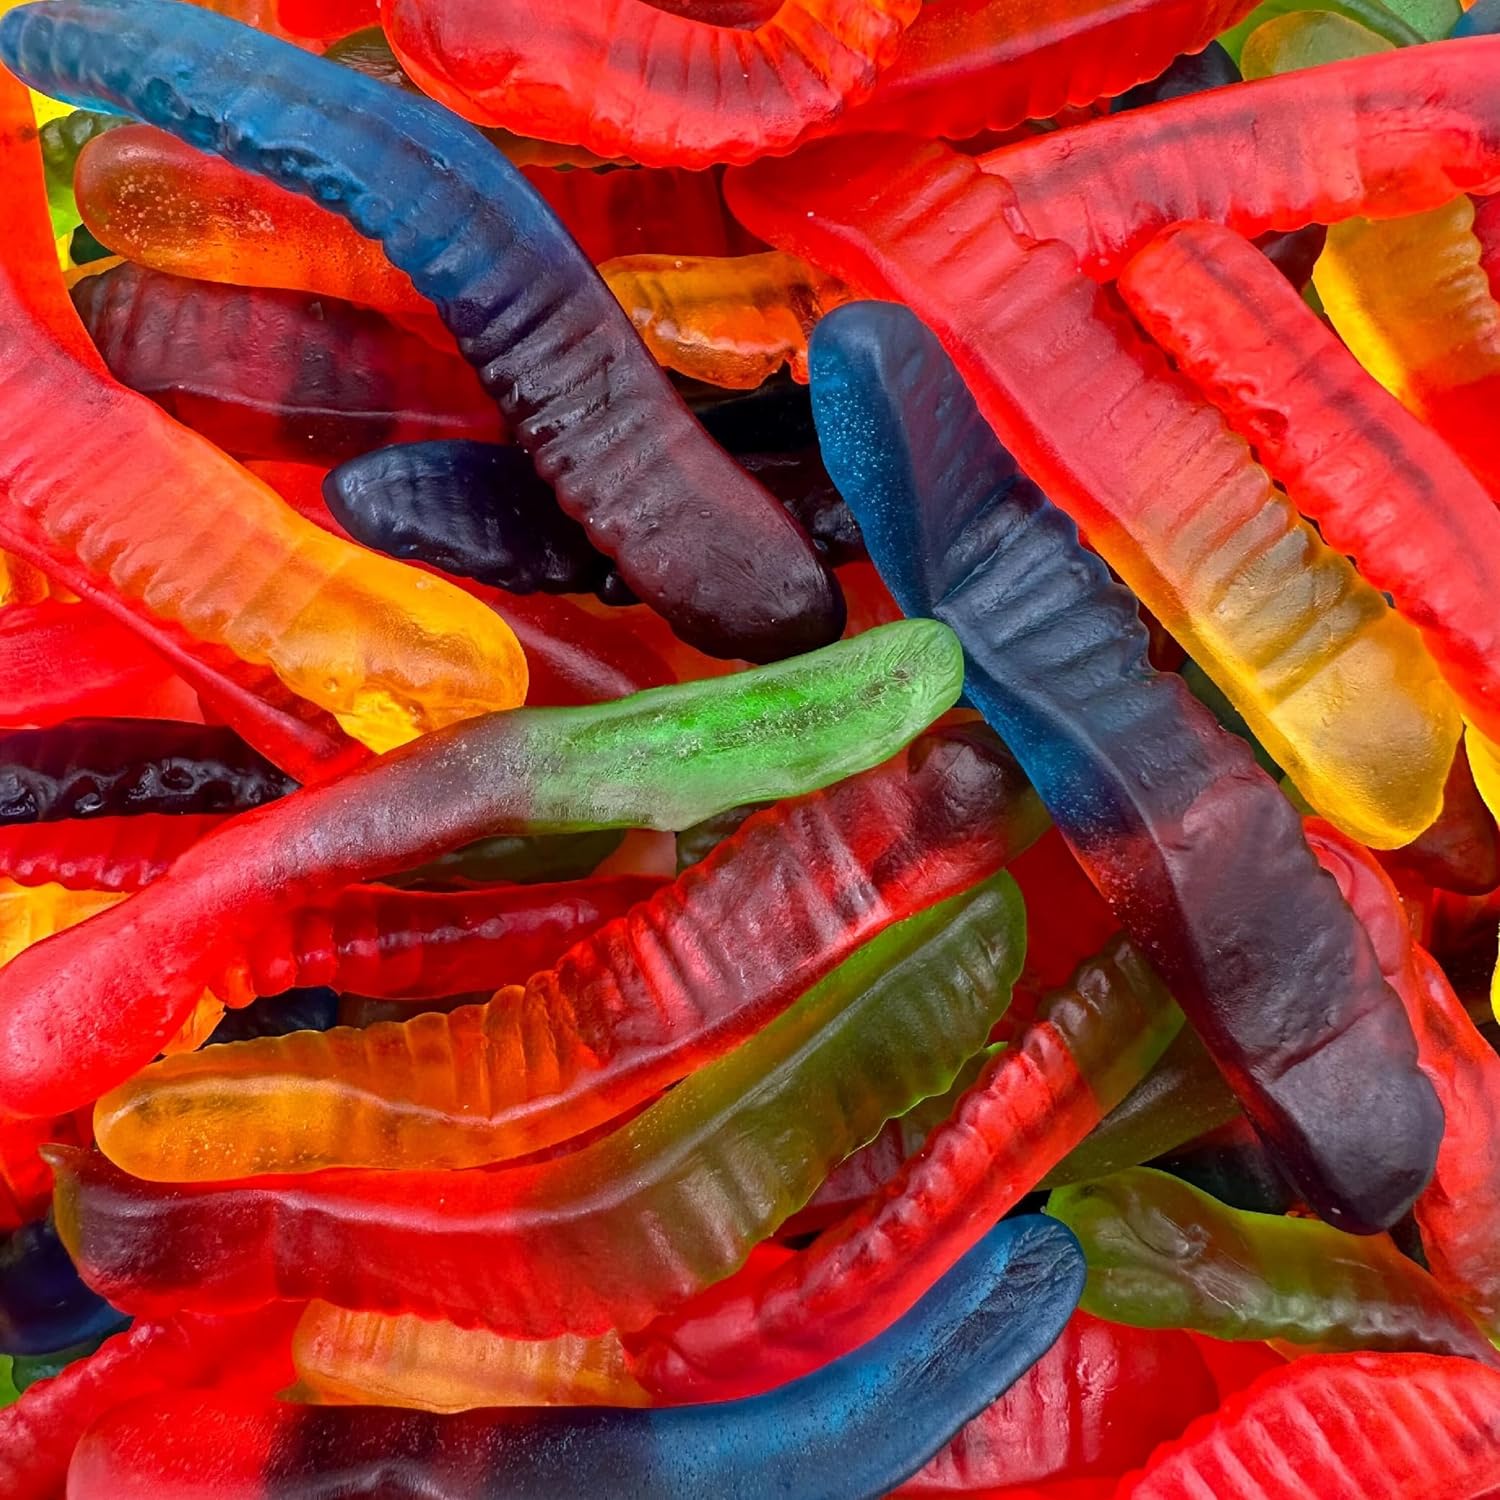 Gummy Worms Candy - Made With Real Fruit Juice - 2-Pound Bag